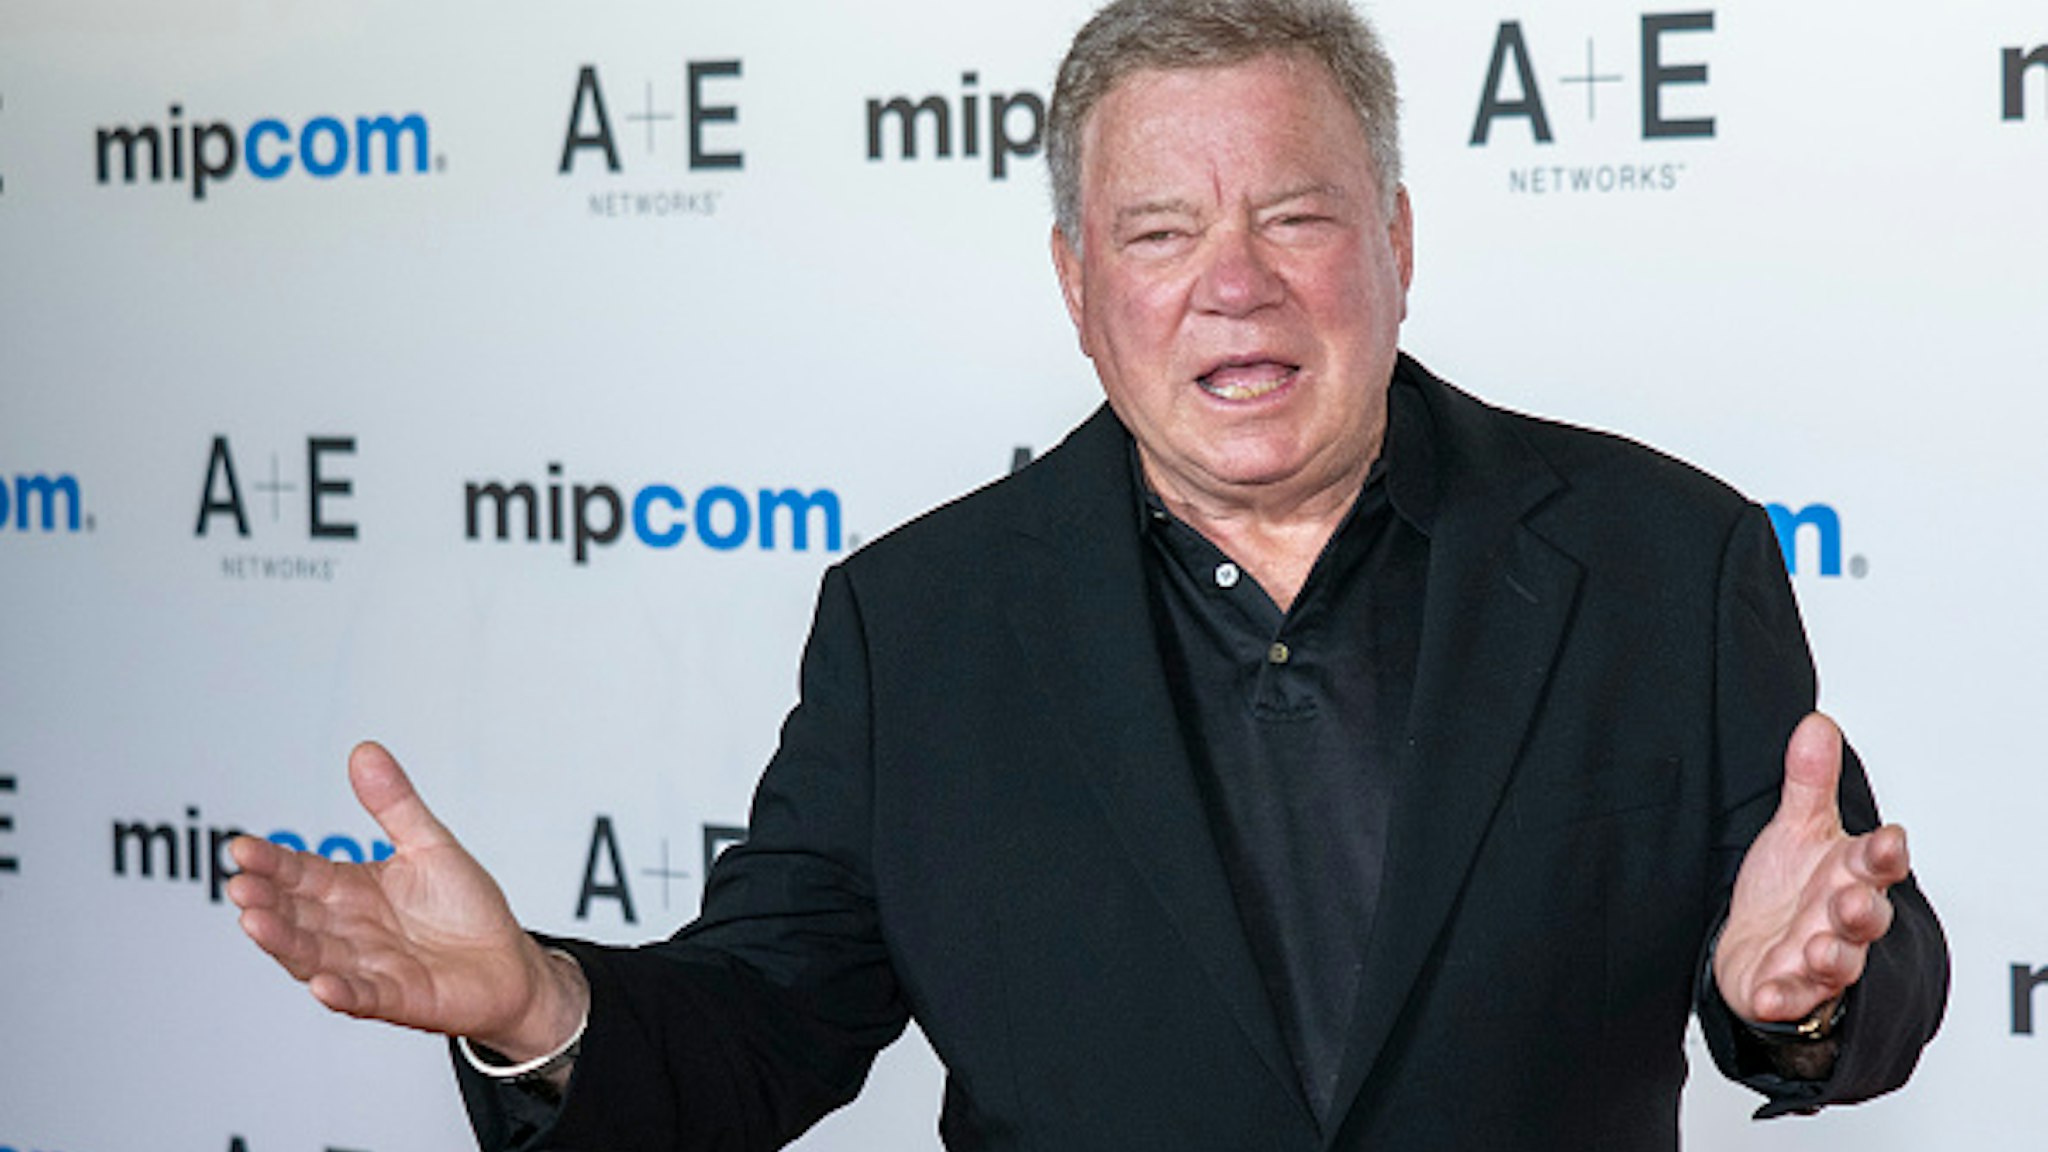 CANNES, FRANCE - OCTOBER 14: William Shatner attends the opening ceremony of MIPCOM 2019 on October 14, 2019 in Cannes, France.